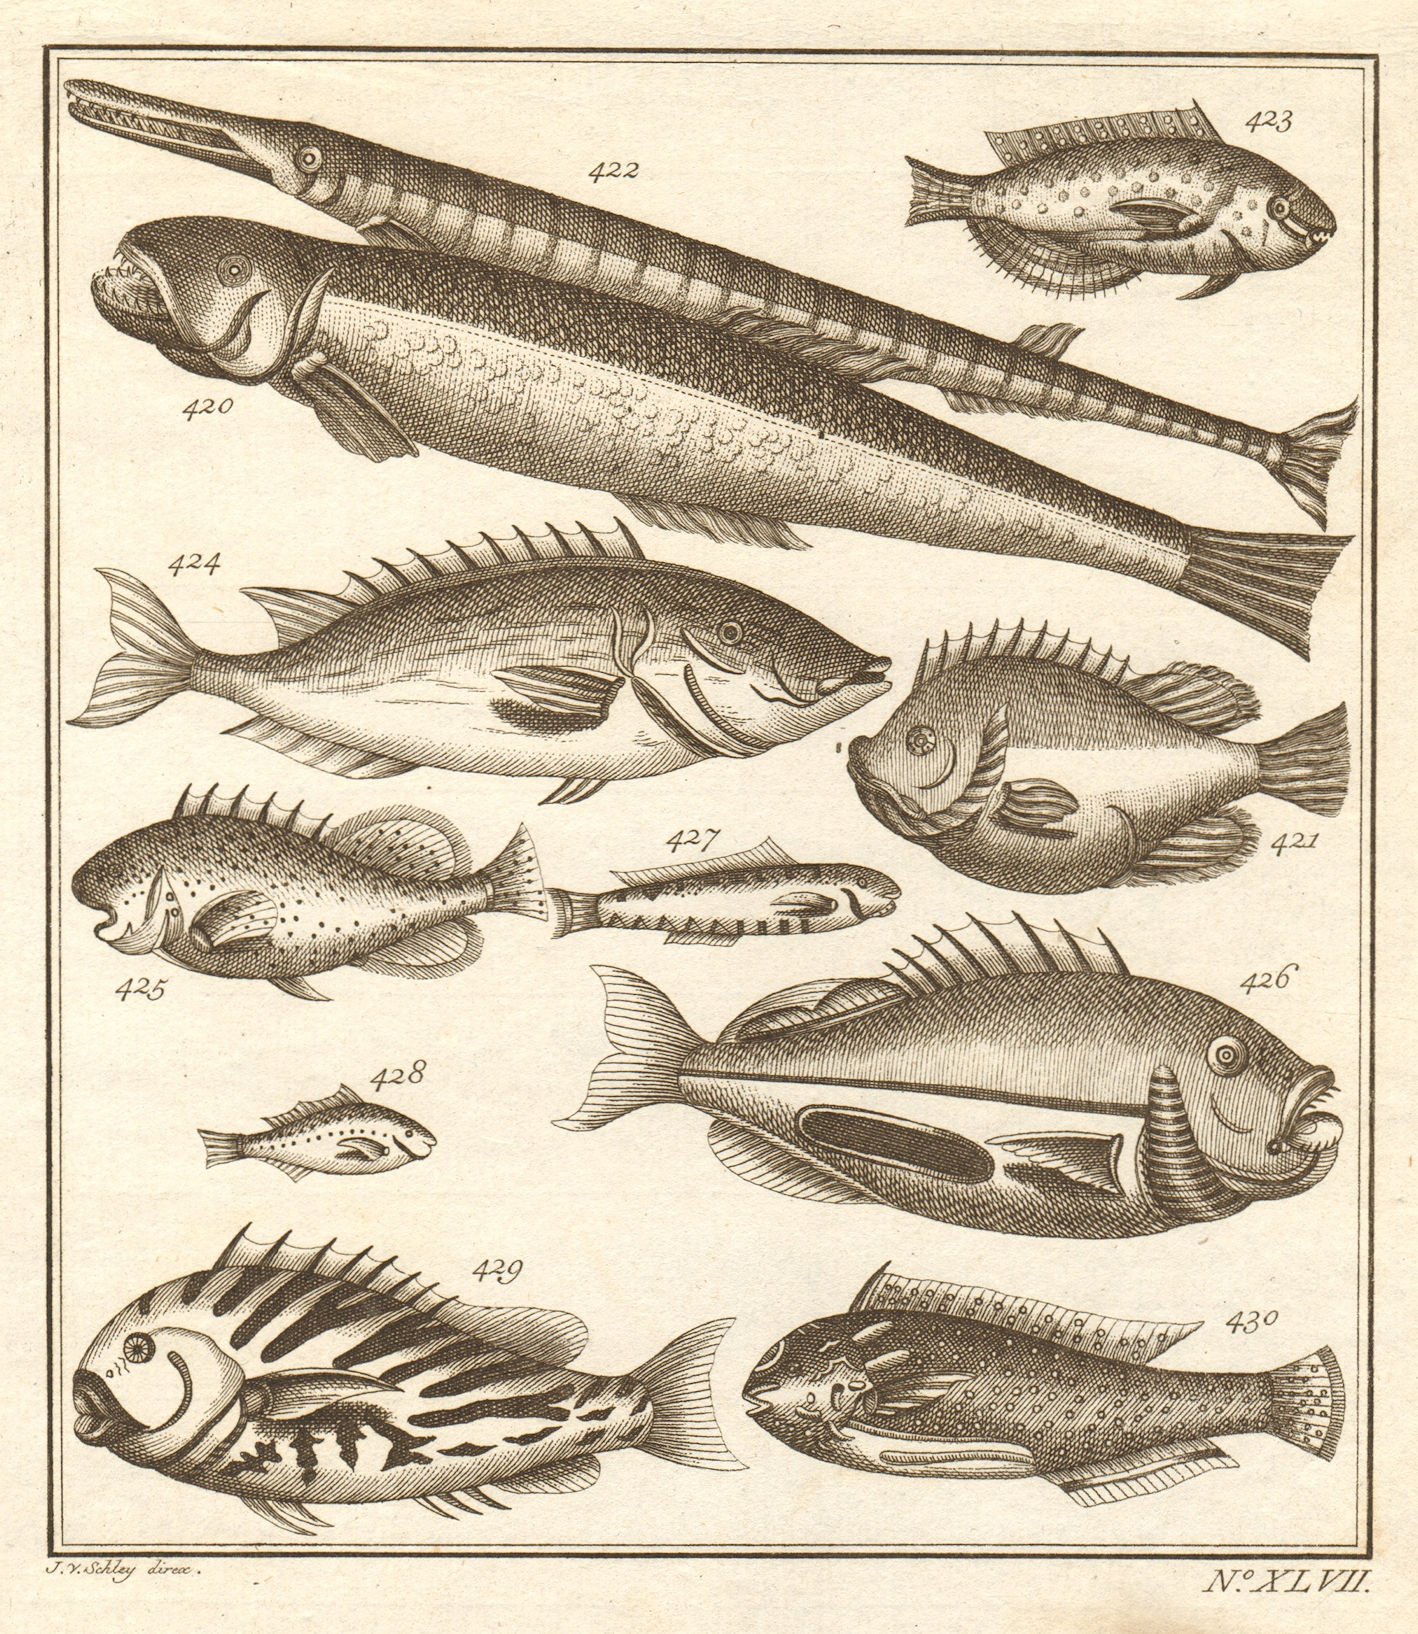 Associate Product XLVII. Poissons d'Ambione. Indonesia Moluccas Maluku tropical fish. SCHLEY 1763